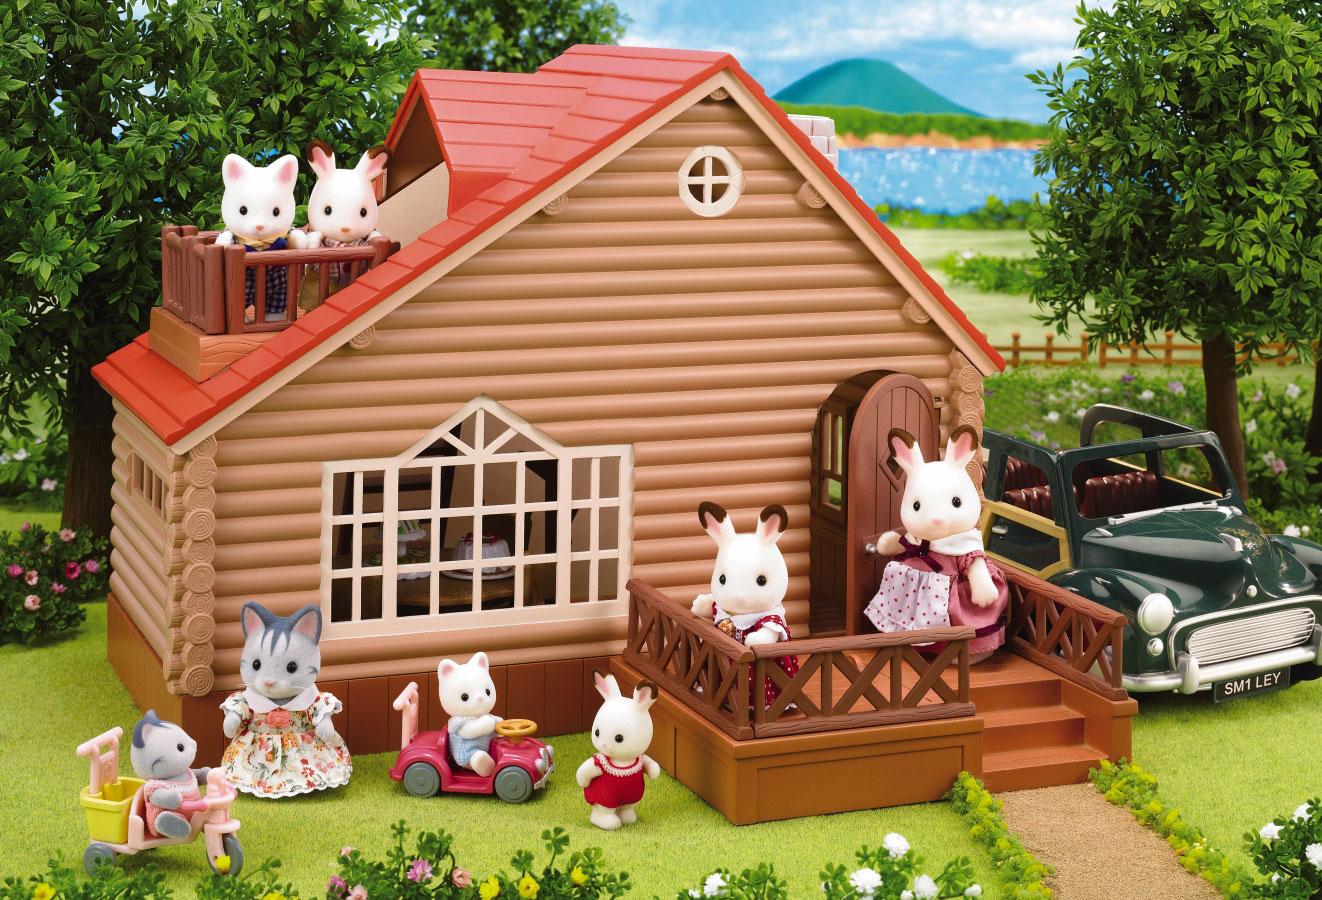 Free download calico critters country tree house calico critters lakeside lodge set [1322x900] for your Desktop, Mobile & Tablet. Explore Calico Critters Wallpaper for Houses. Calico Critter Wallpaper, Calico